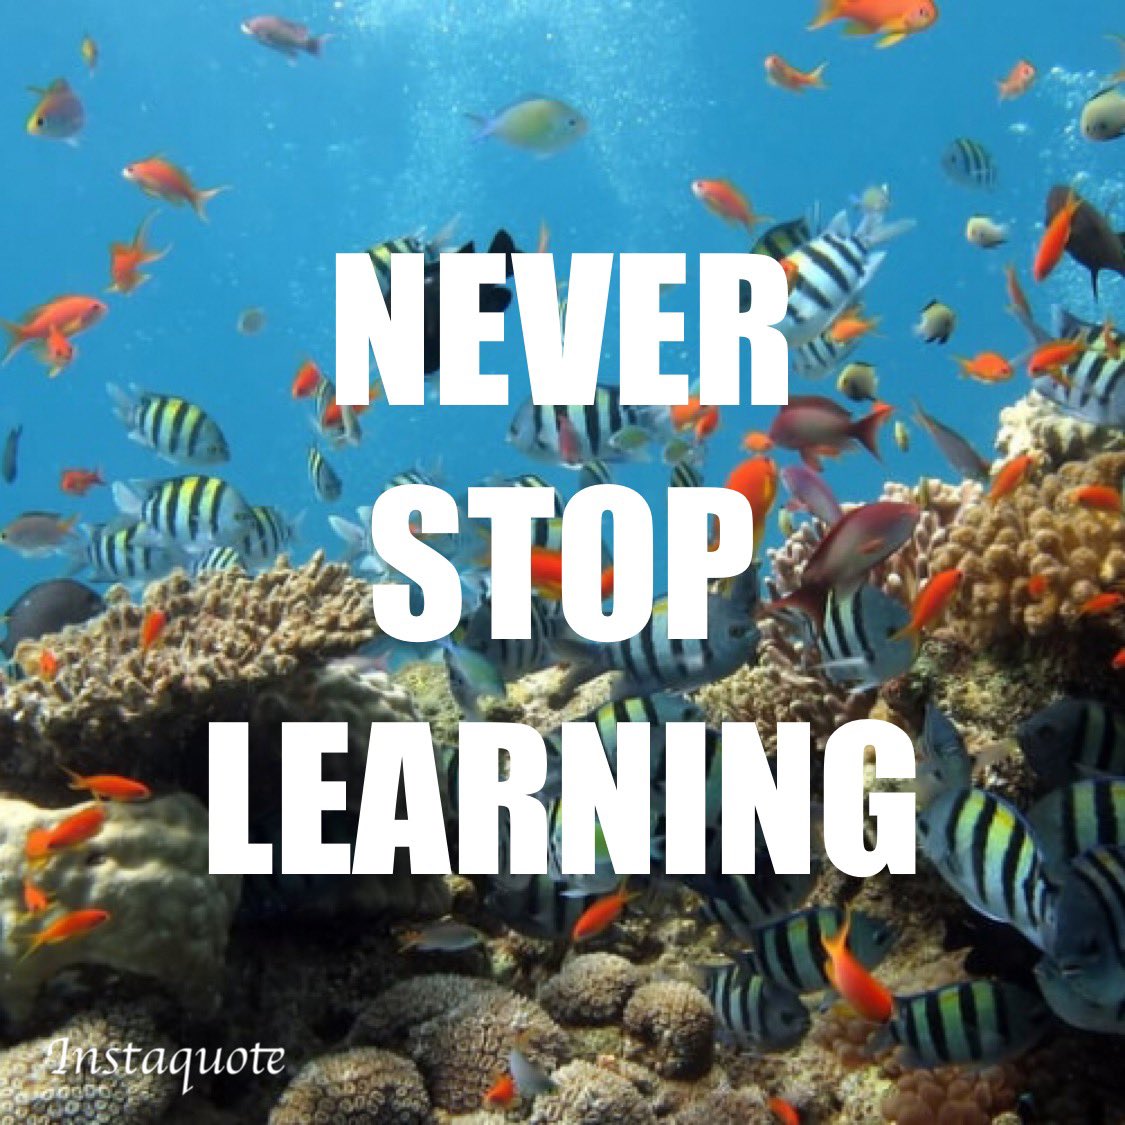 Any skill you learn can be used in everyday life in some way, shape, or form. And there are a lot of skills that can be learned for free. #LearnANewSkill #NeverStopLearning #KeepGoing #Growth #BusinessSkills #Entrepreneur #Education #EducateYourself #LearnMore #DoMore